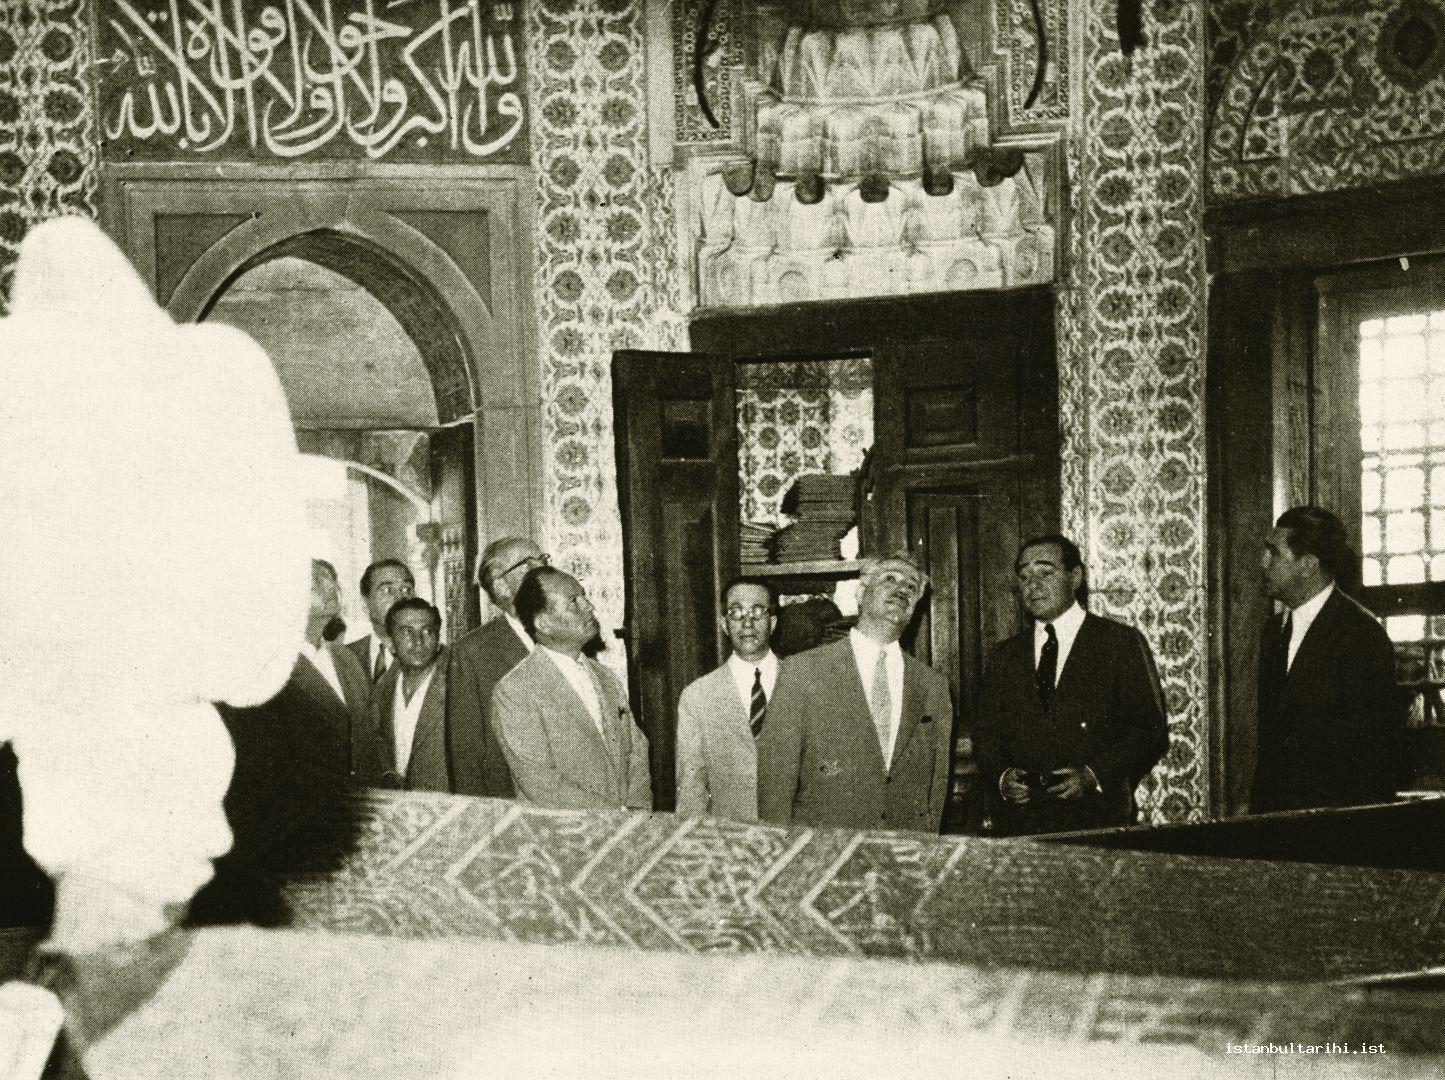 8- “In this picture, Prime Minister Adnan Menderes who has paid close attention to every step of Istanbul development movements is in the tomb of Sultan Süleyman I. He
    is seen as inspecting the matters related to Süleymaniye Complex (Kulliyah).”